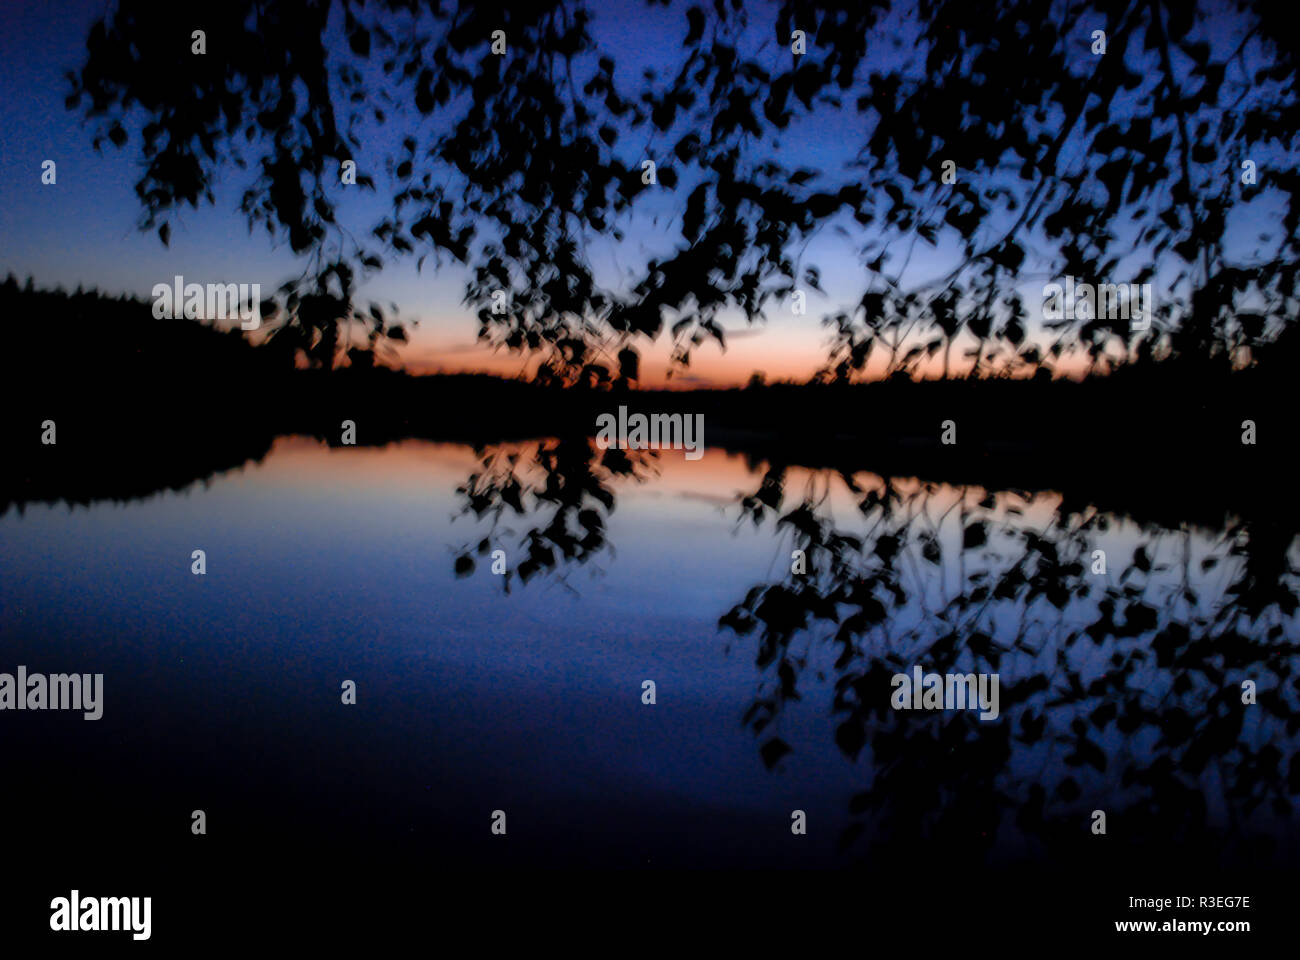 Blue hour over a lake with reflection in Skåne, southern Sweden Stock Photo